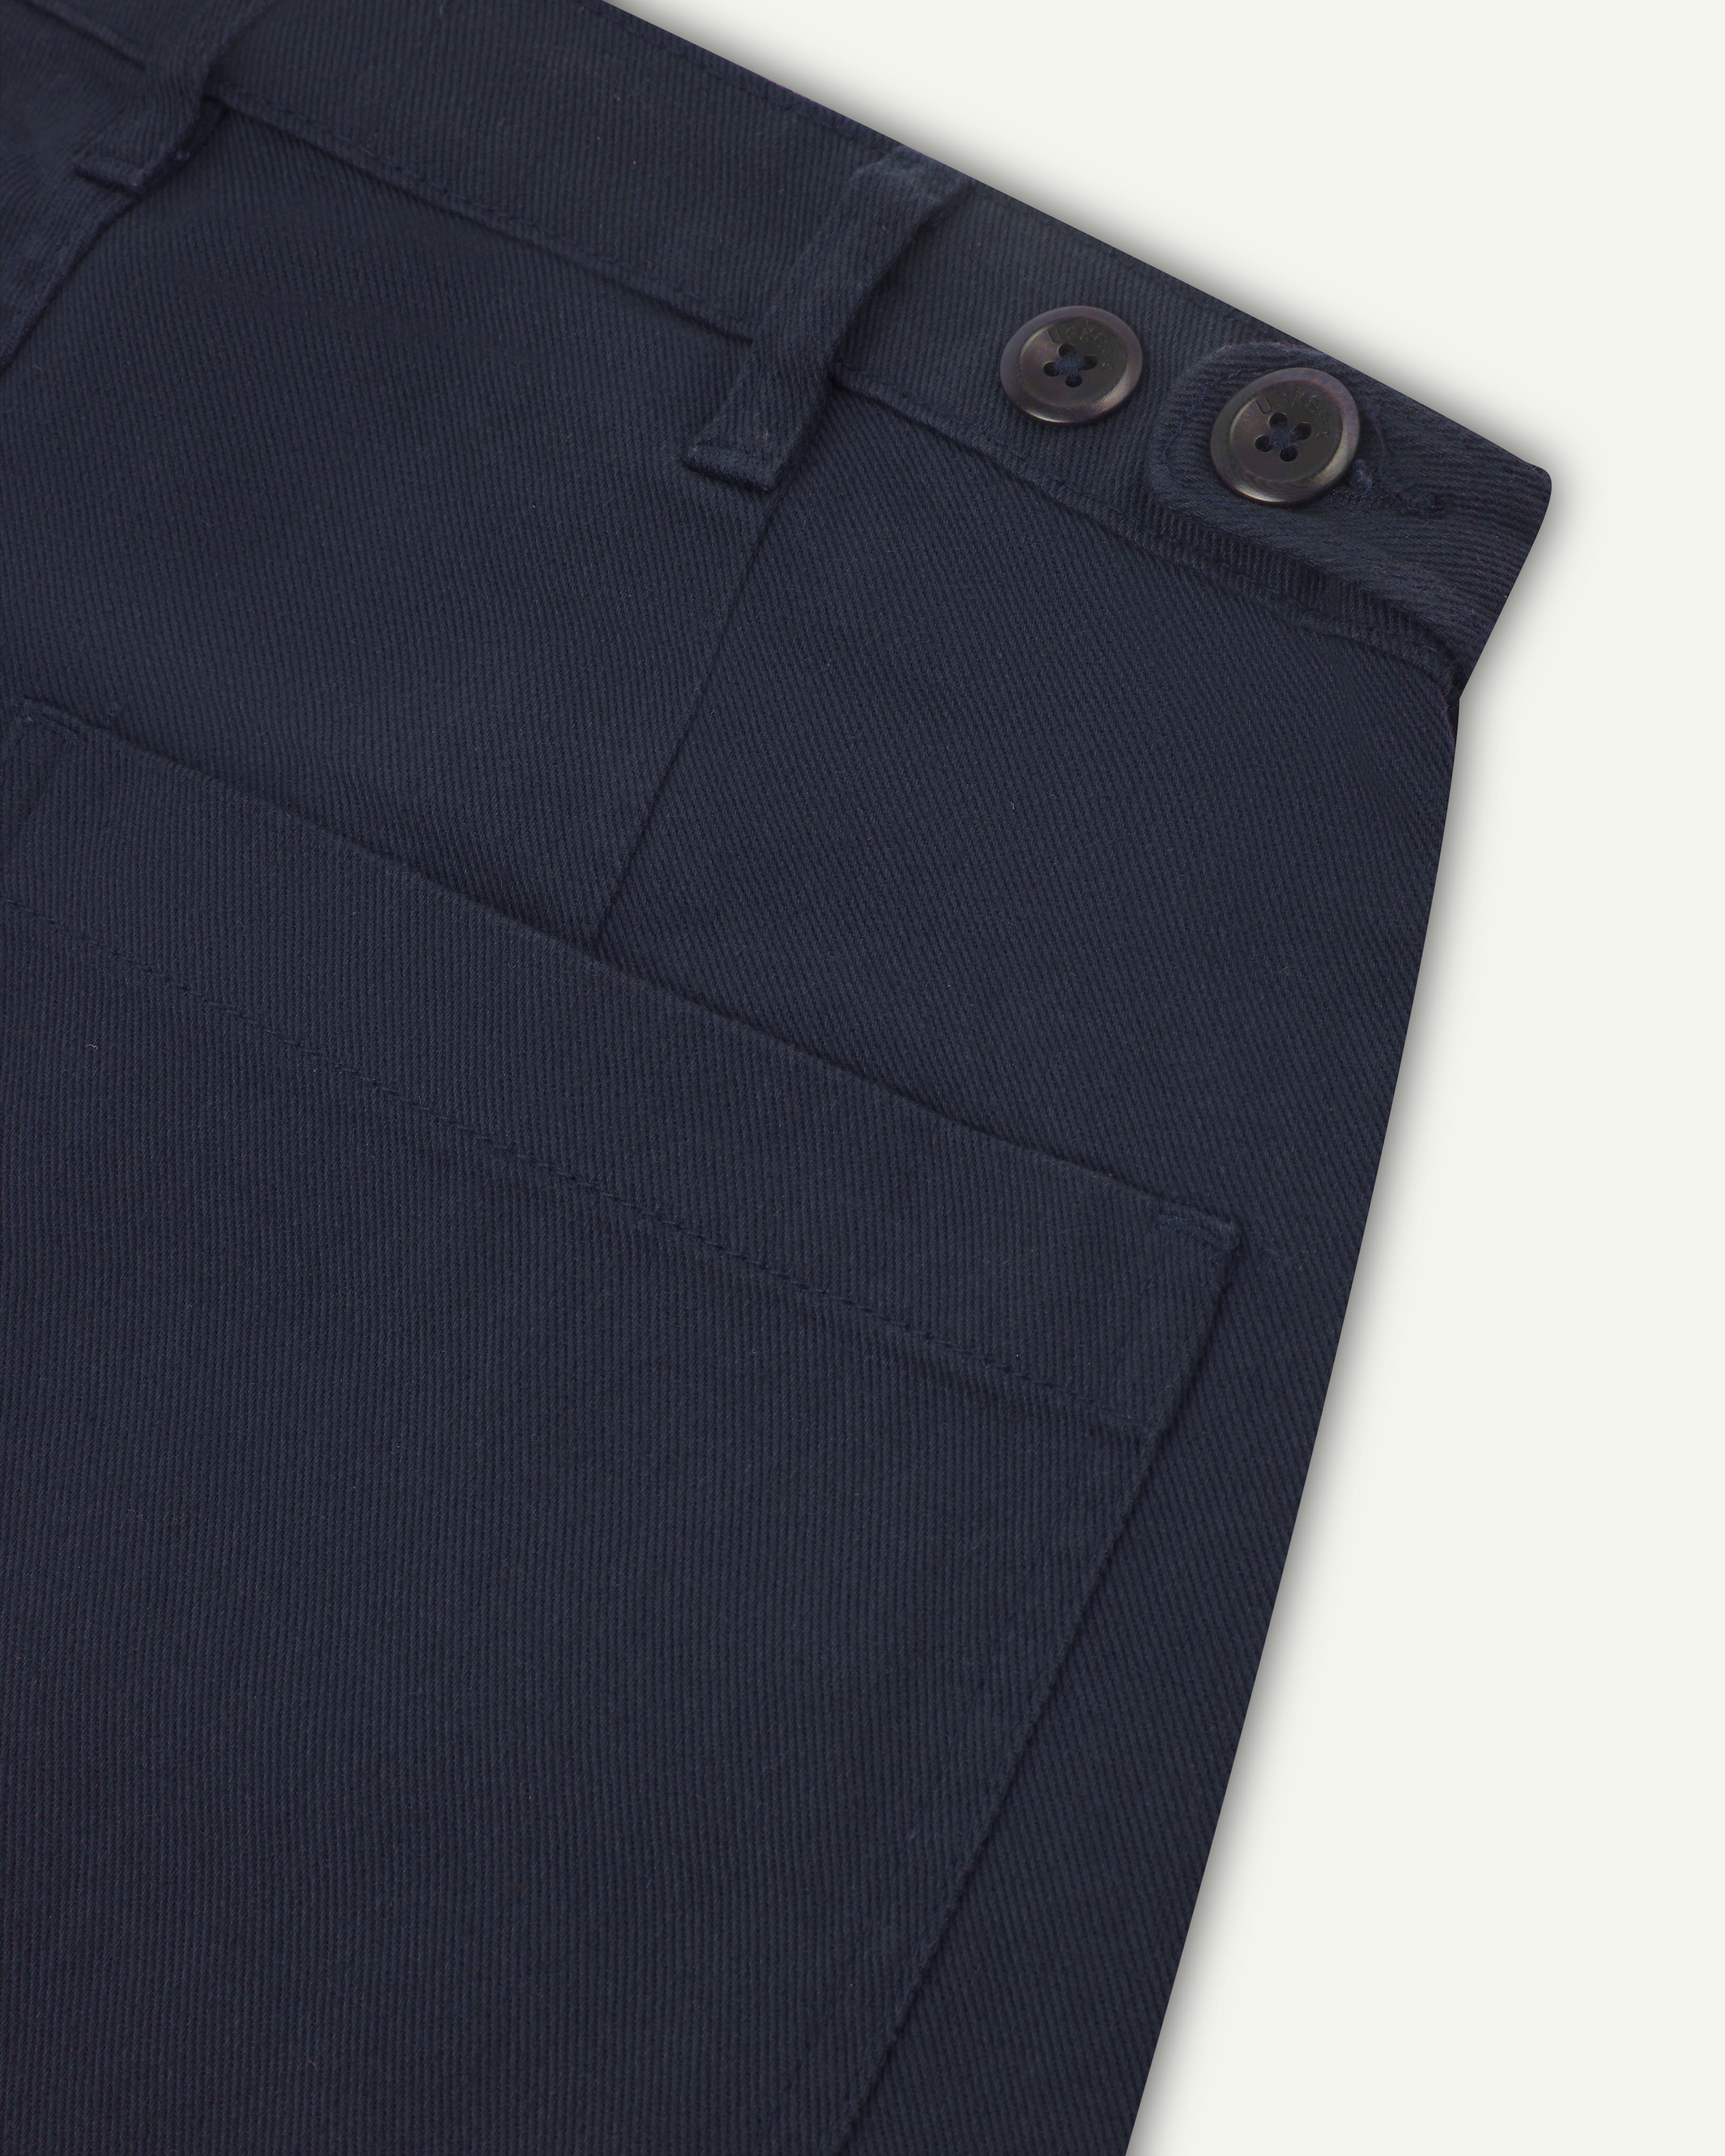 Close up shot of dark blue drill trousers from uskees showing back pocket and waist band button adjusters